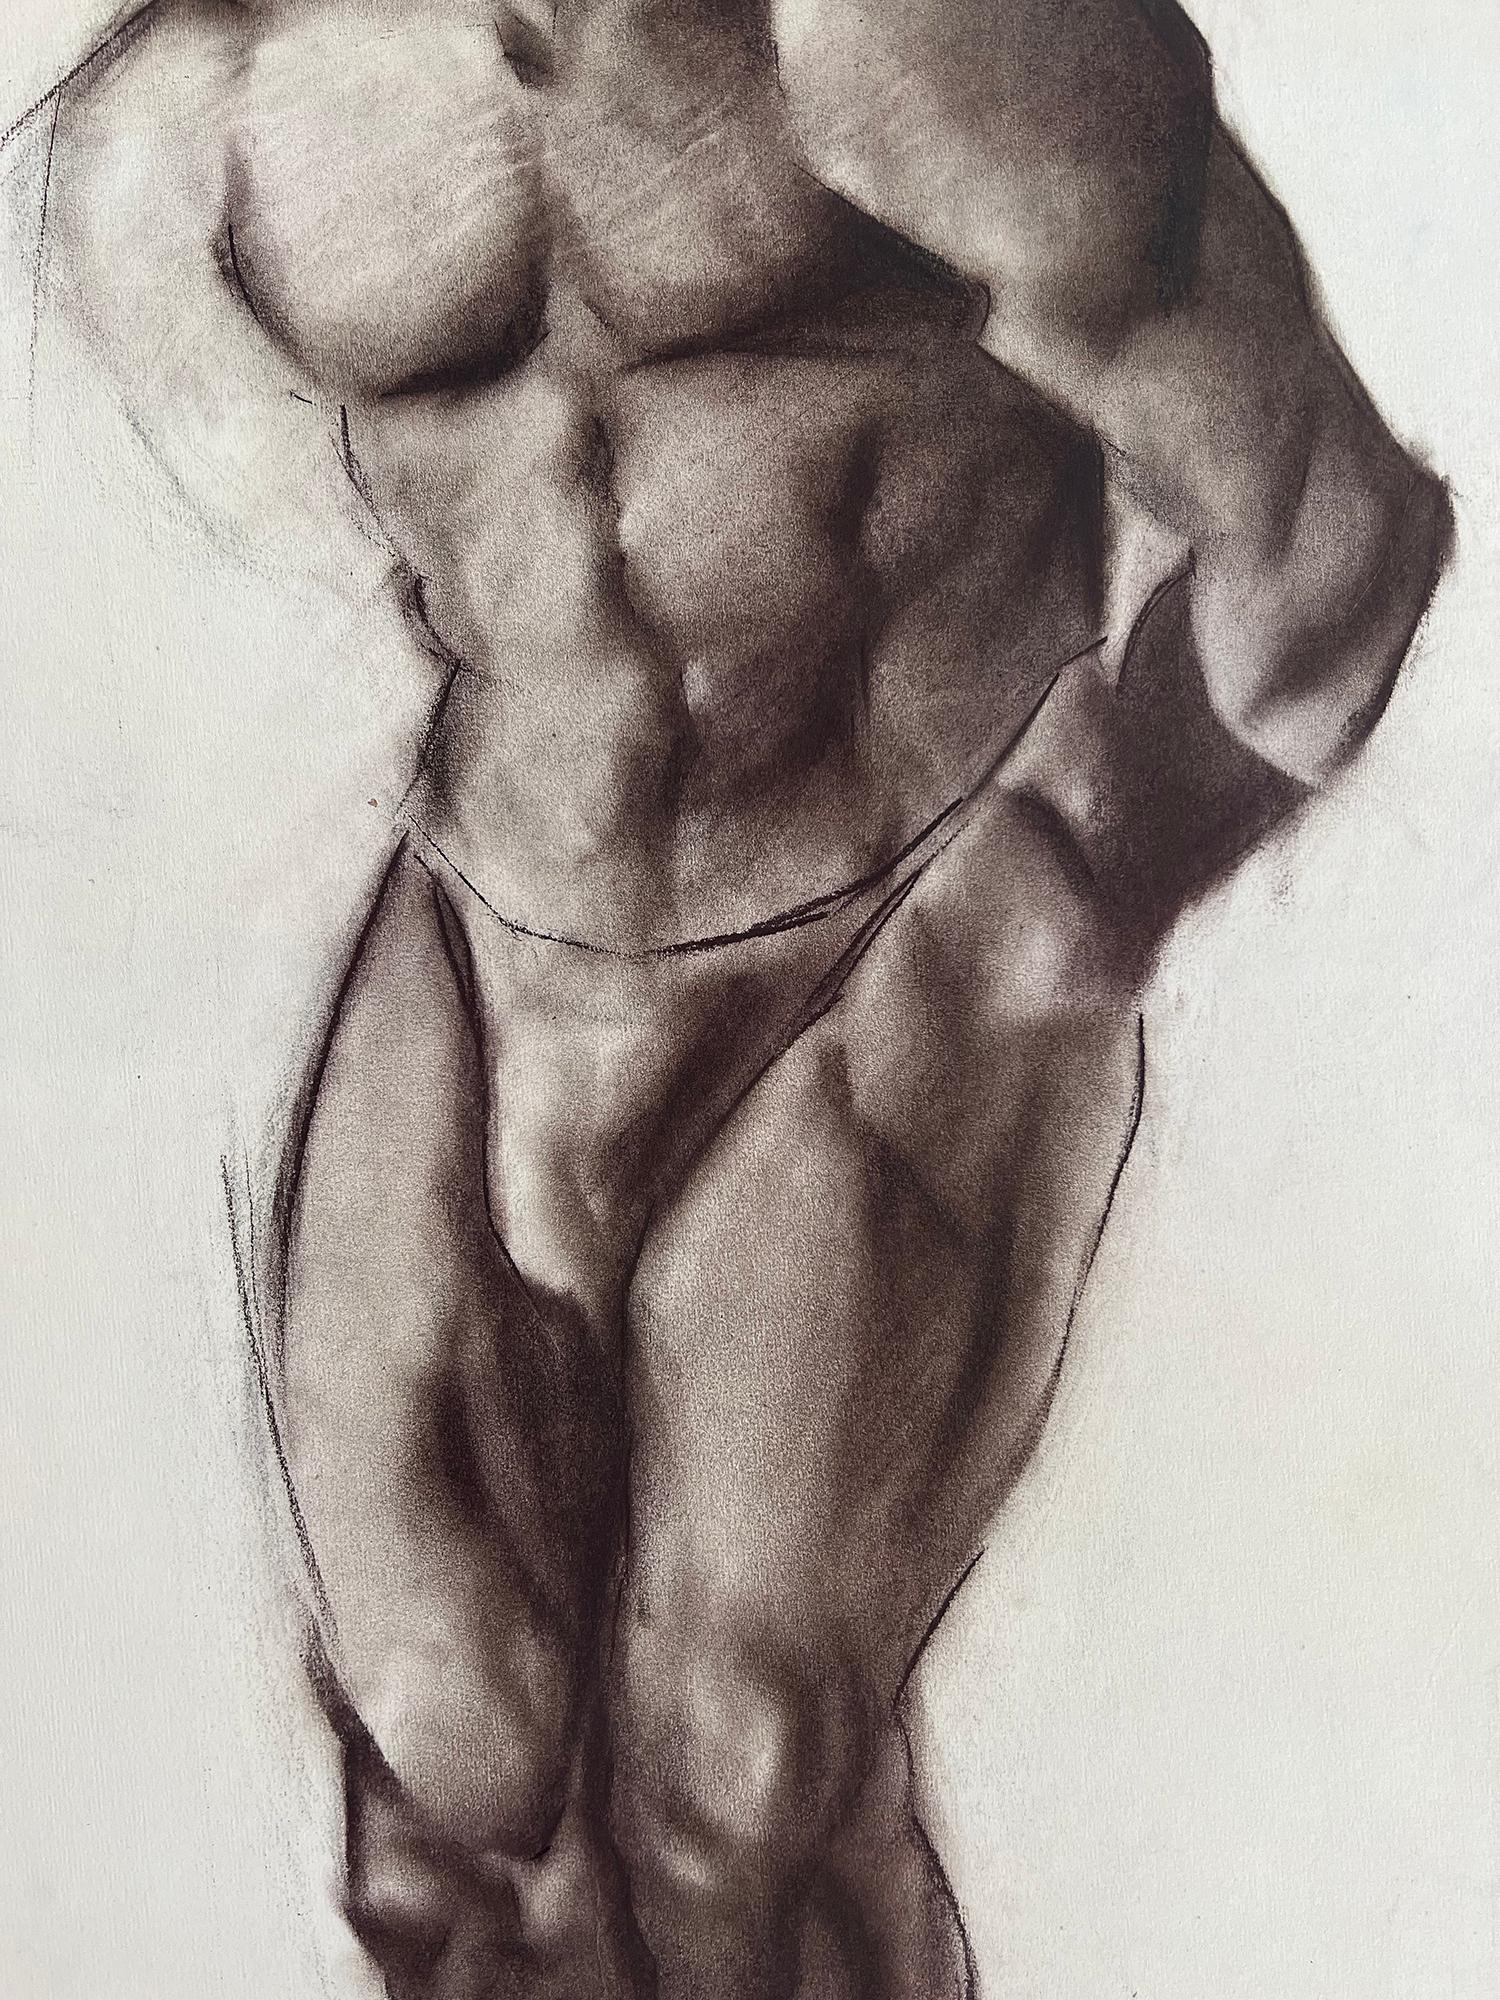 Charcoal on cream laid paper mounted on board. 940x590 mm; 37x23 1/4 inches. Signed in charcoal, lower right recto. 
Unframed, The Paper has a slight ripple in the chest area. Four small incisions in the head area. Smudging. 2-inch horizontal band